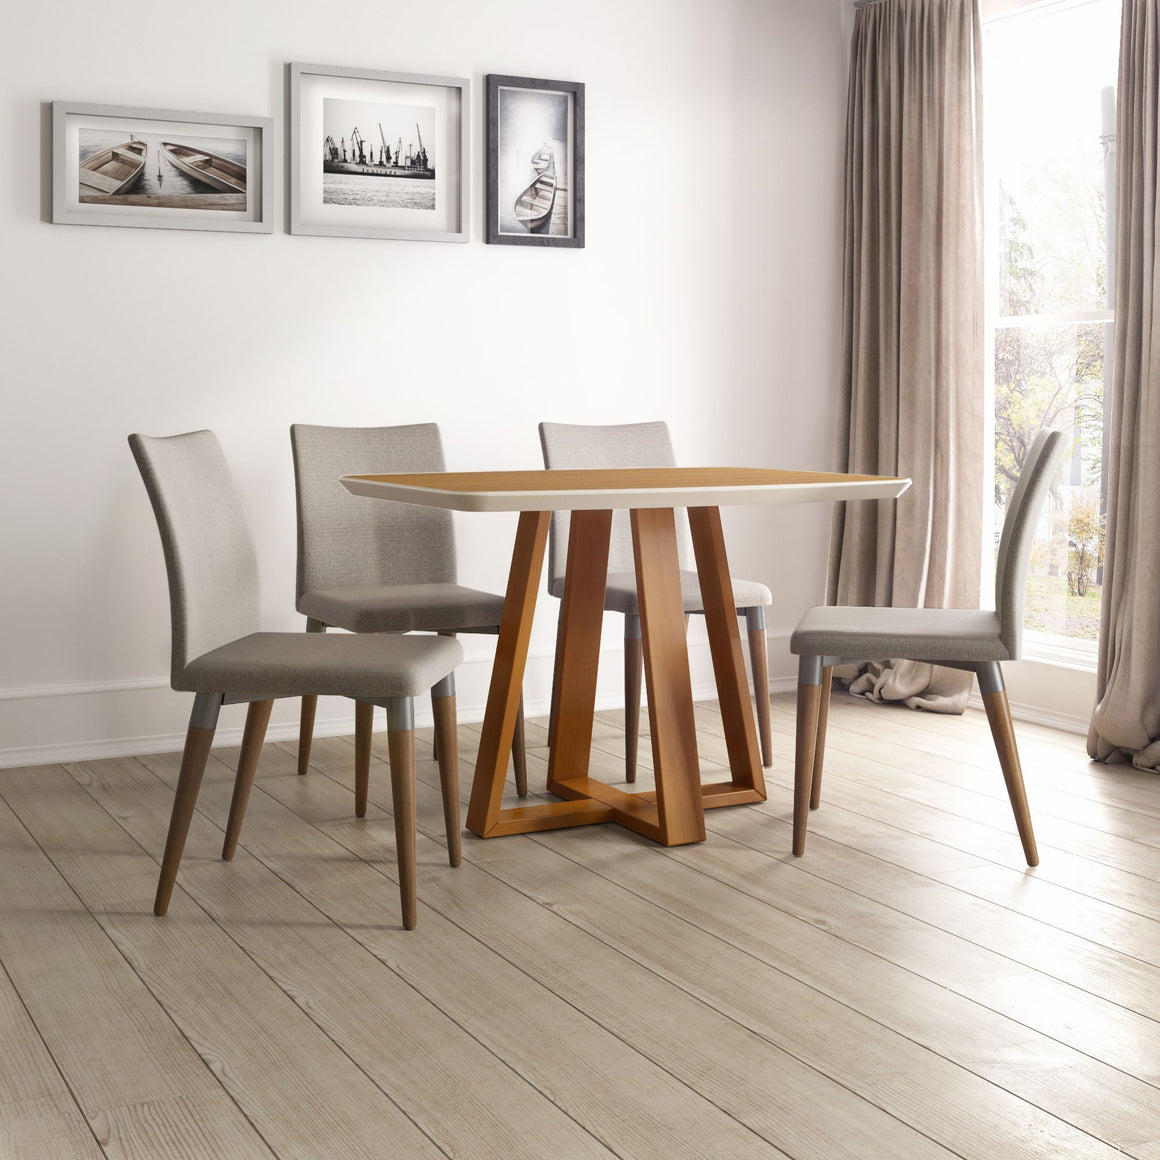 Duffy 62.99 Modern Rectangle Dining Table and Charles Dining Chair in Cinnamon Off White and Grey - Set of 7